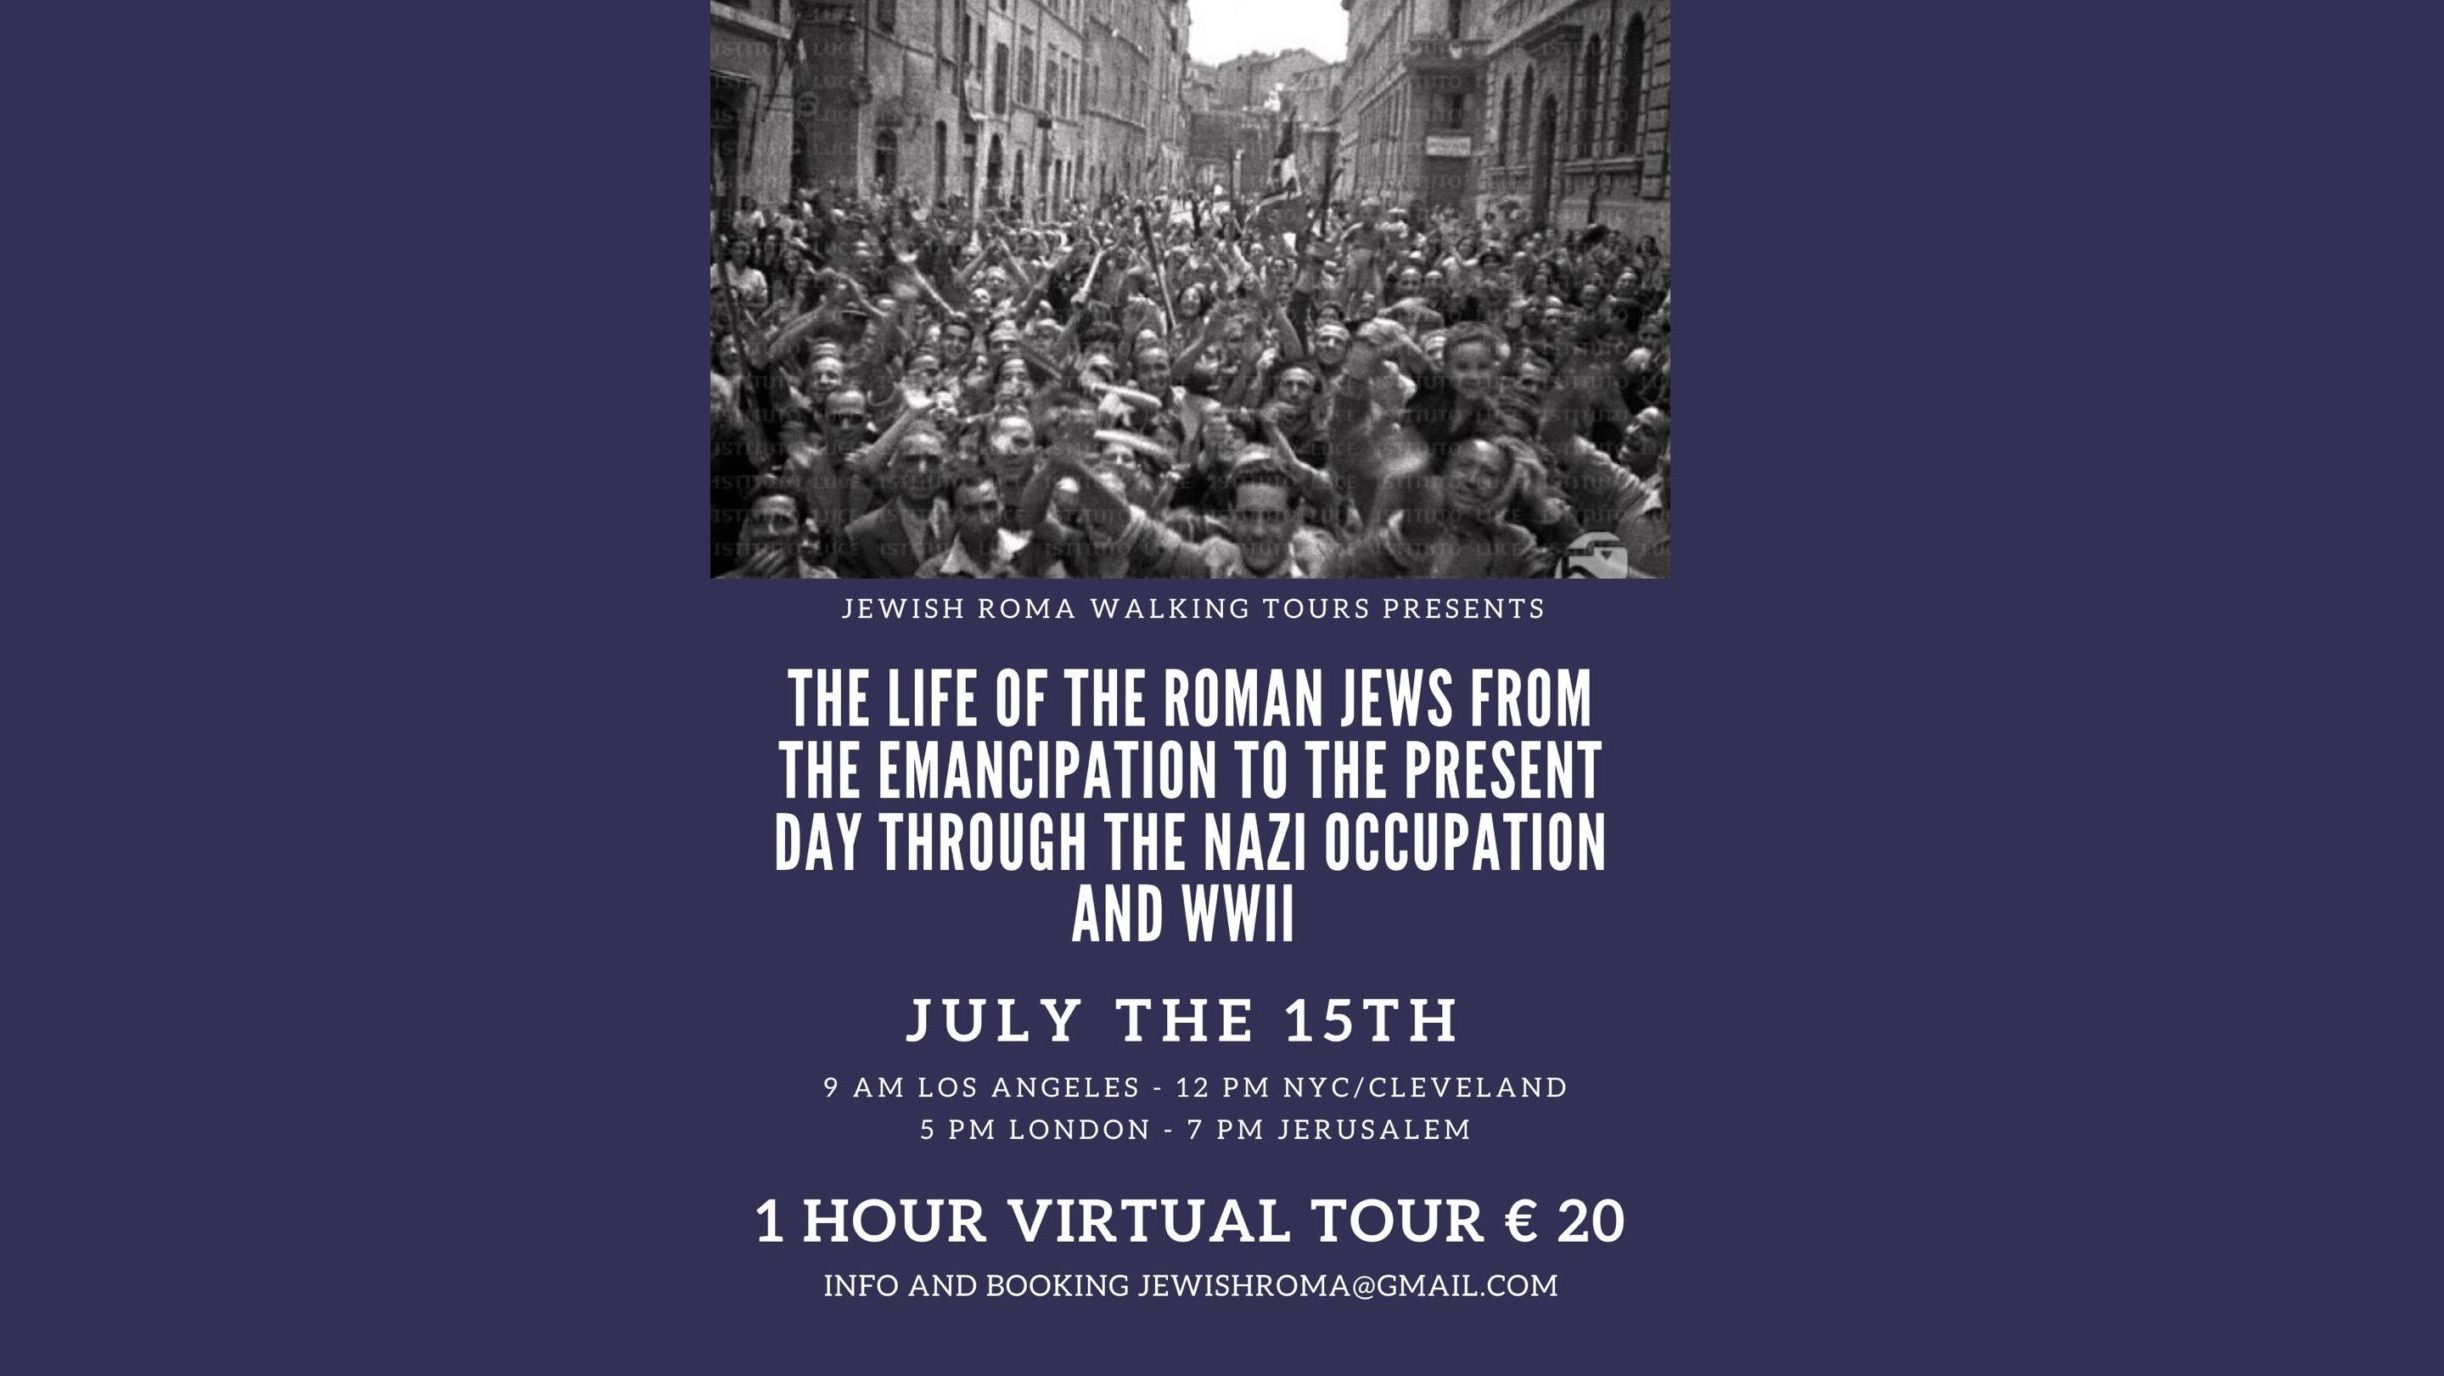 The Jews of Rome During WWII and the Nazi Occupation